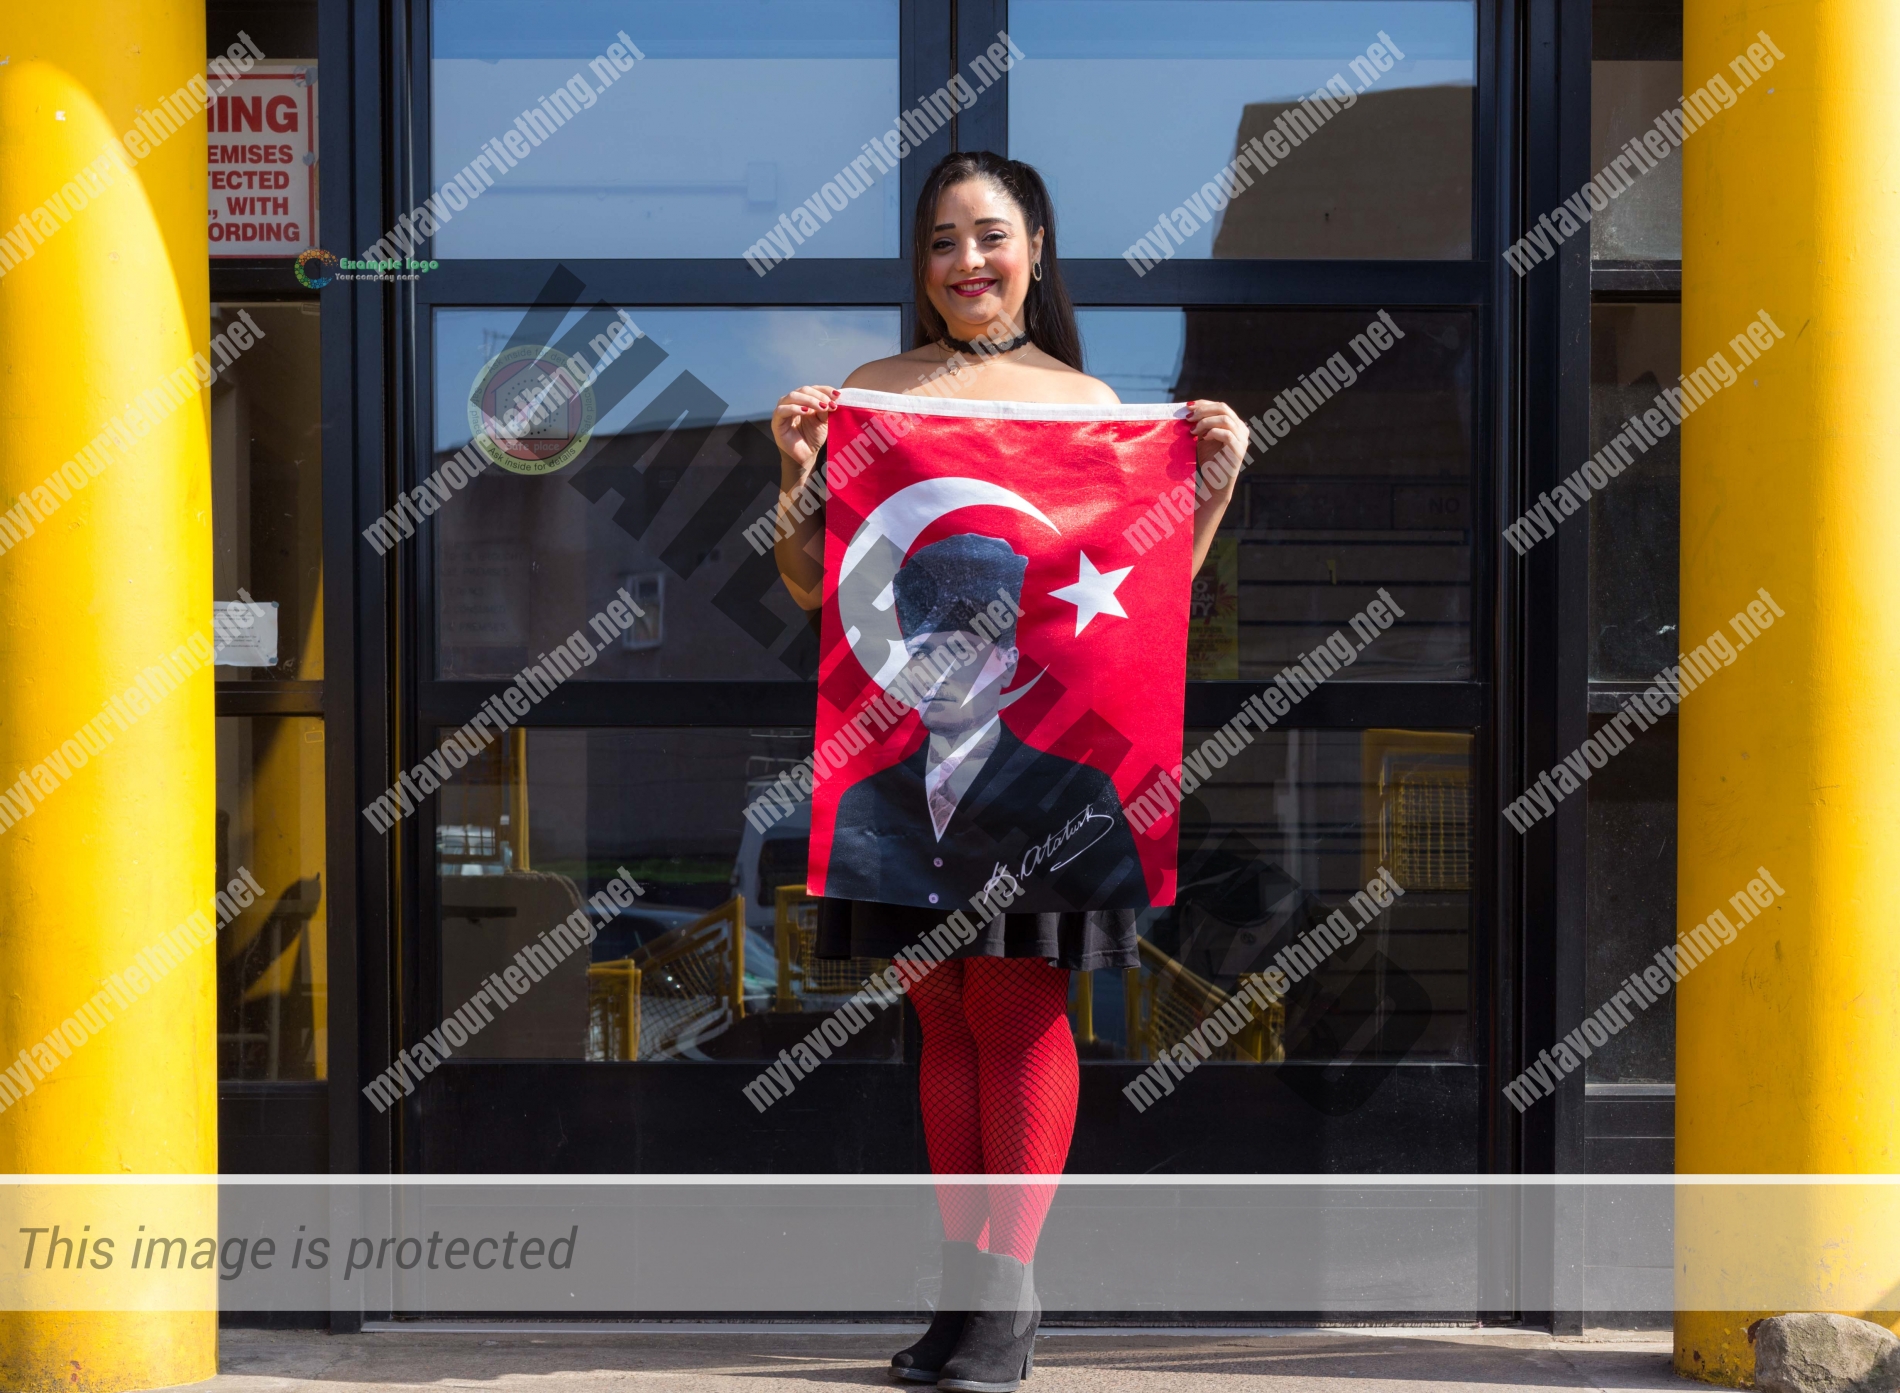 Flautist Koza Unal with the flag of Turkey featuring Ataturk, outside the Malcolm X Centre in Bristol